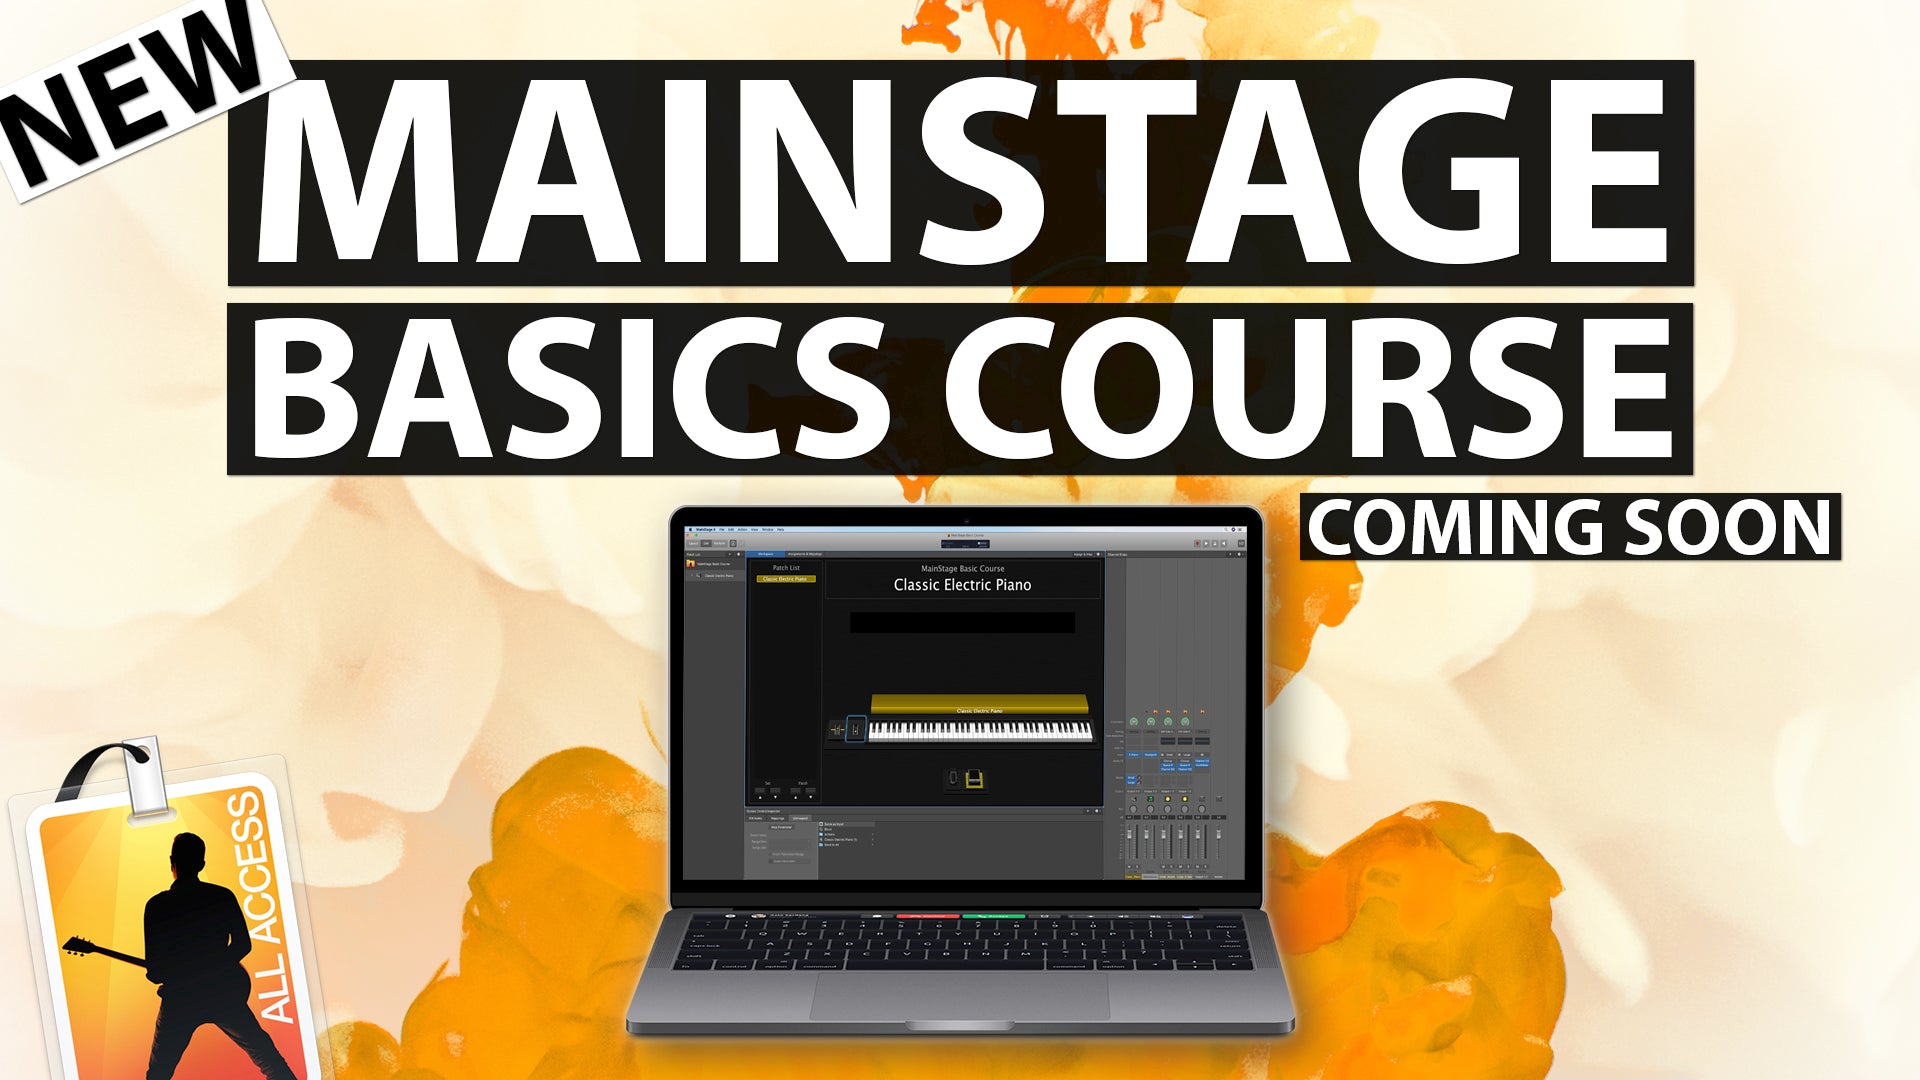 mainstage basics course coming soonblog.jpg